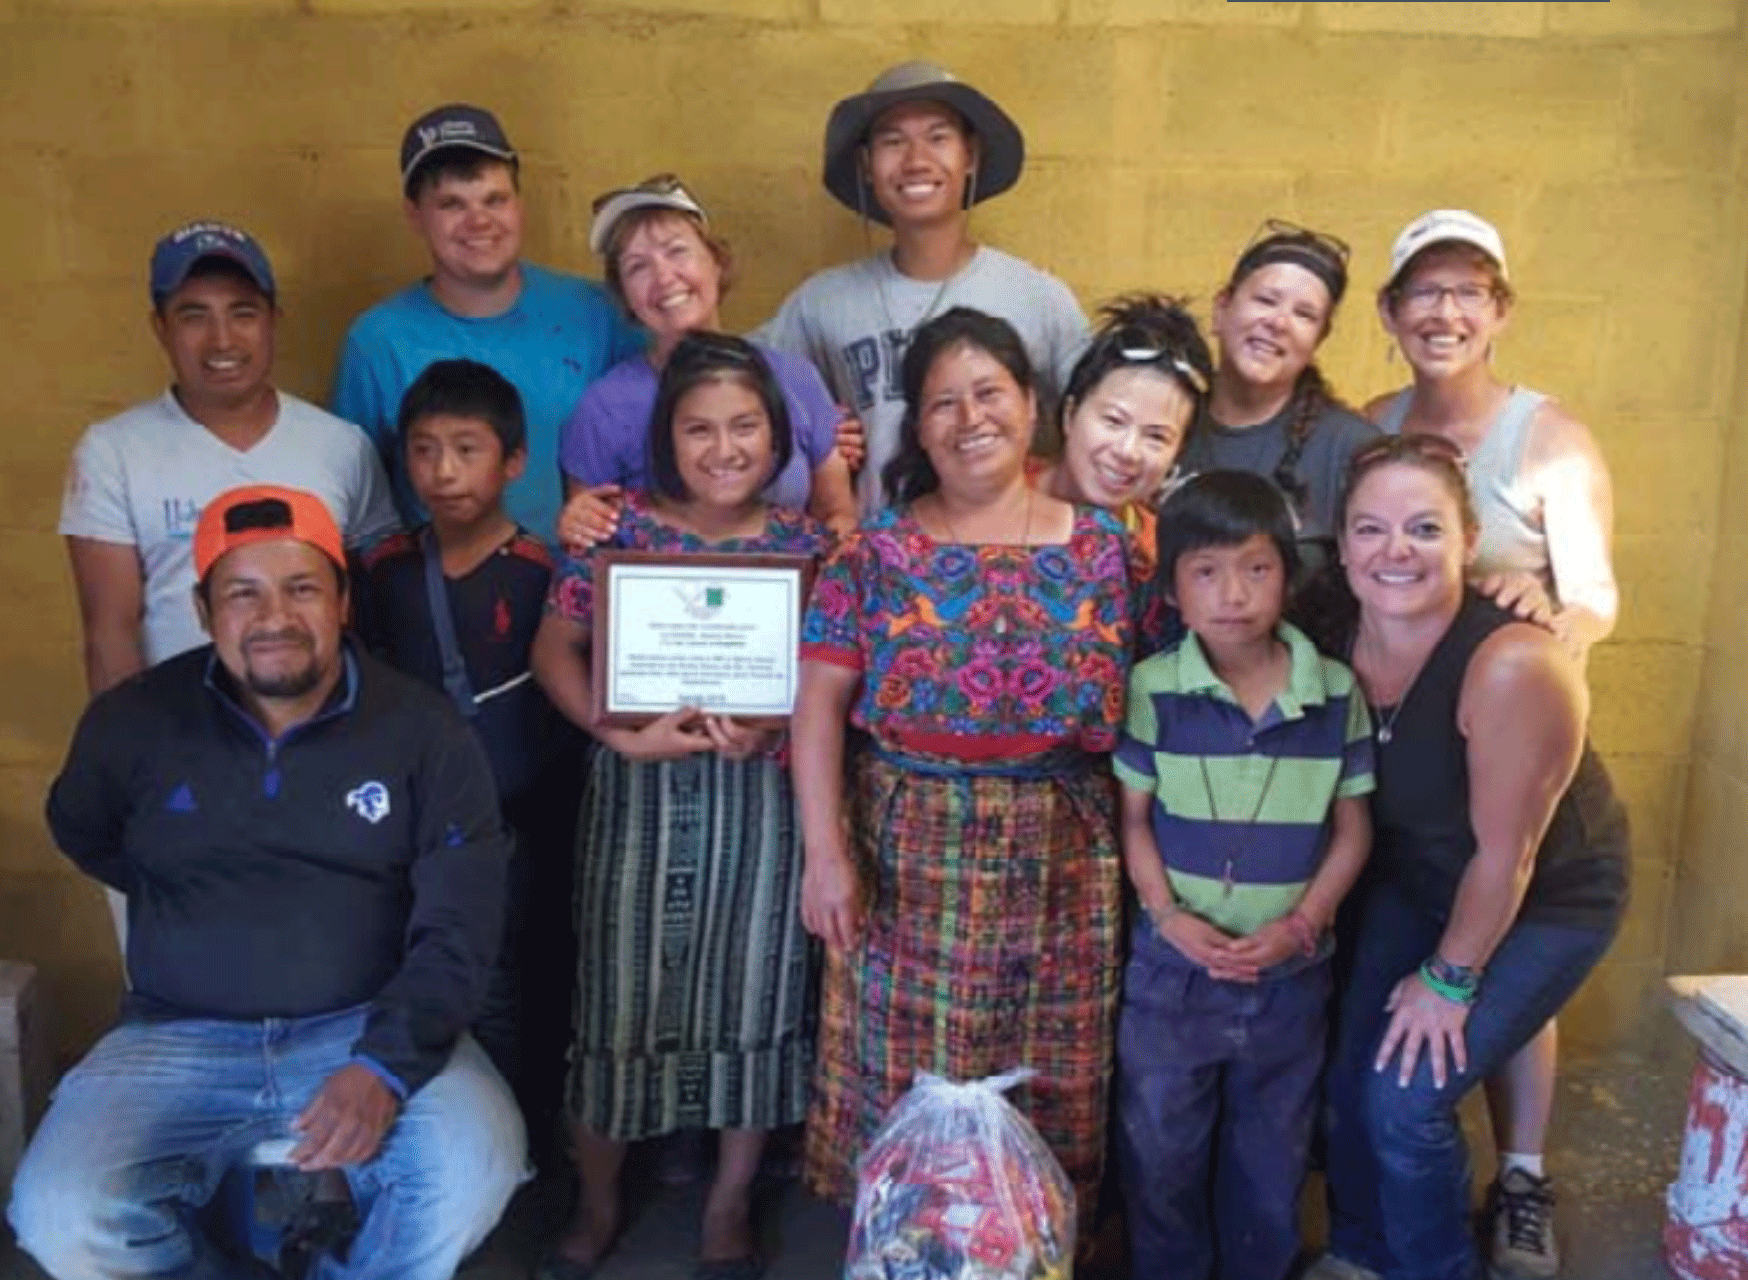 Mission trip members and Guatemalan family group picture